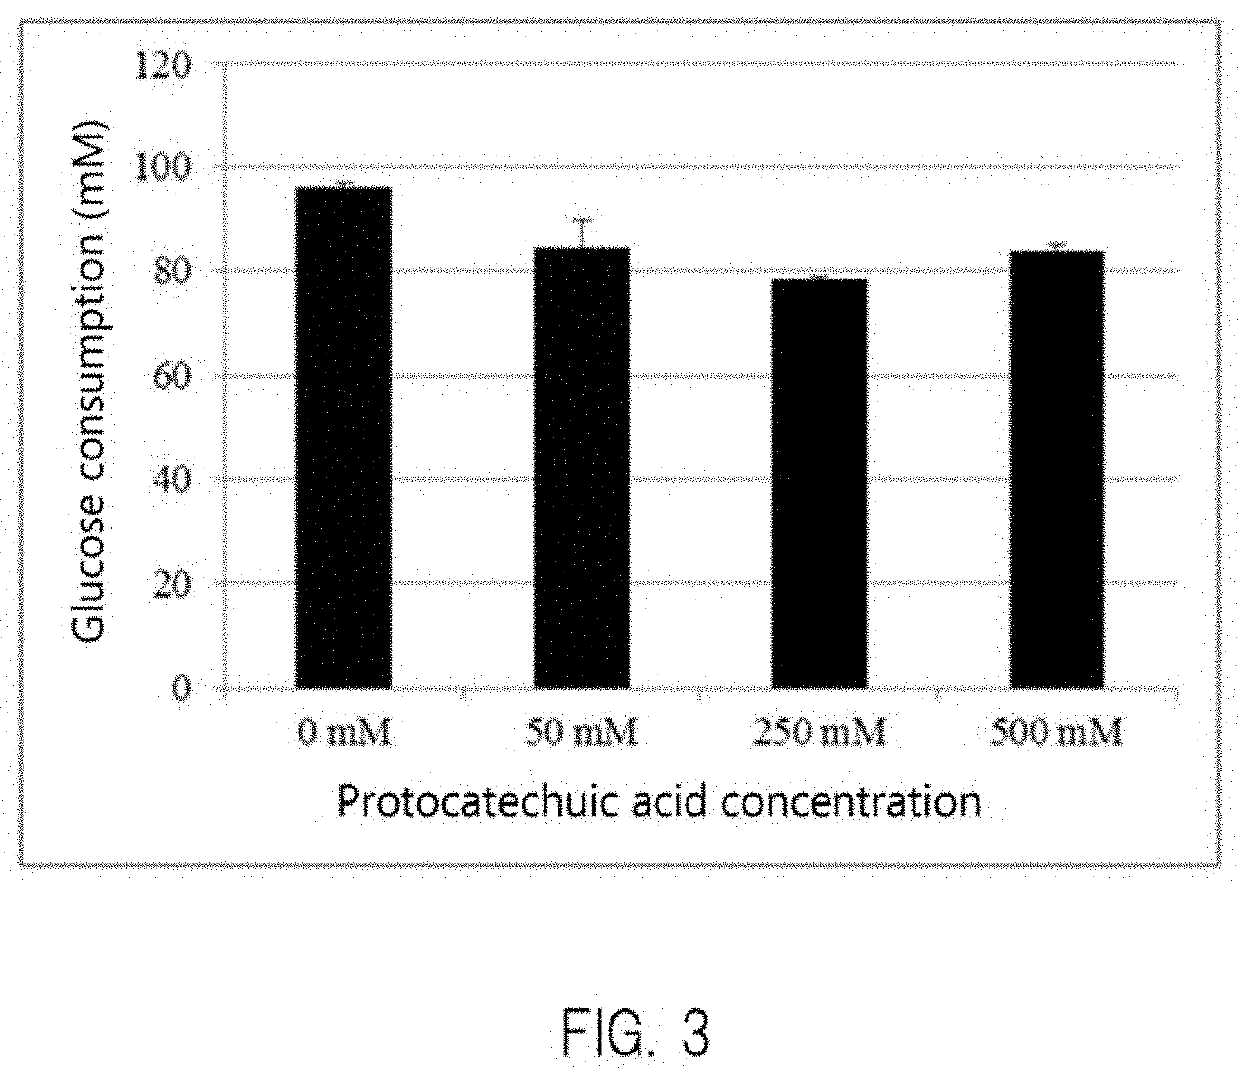 Transformant, and method for producing protocatechuic acid or salt thereof using same